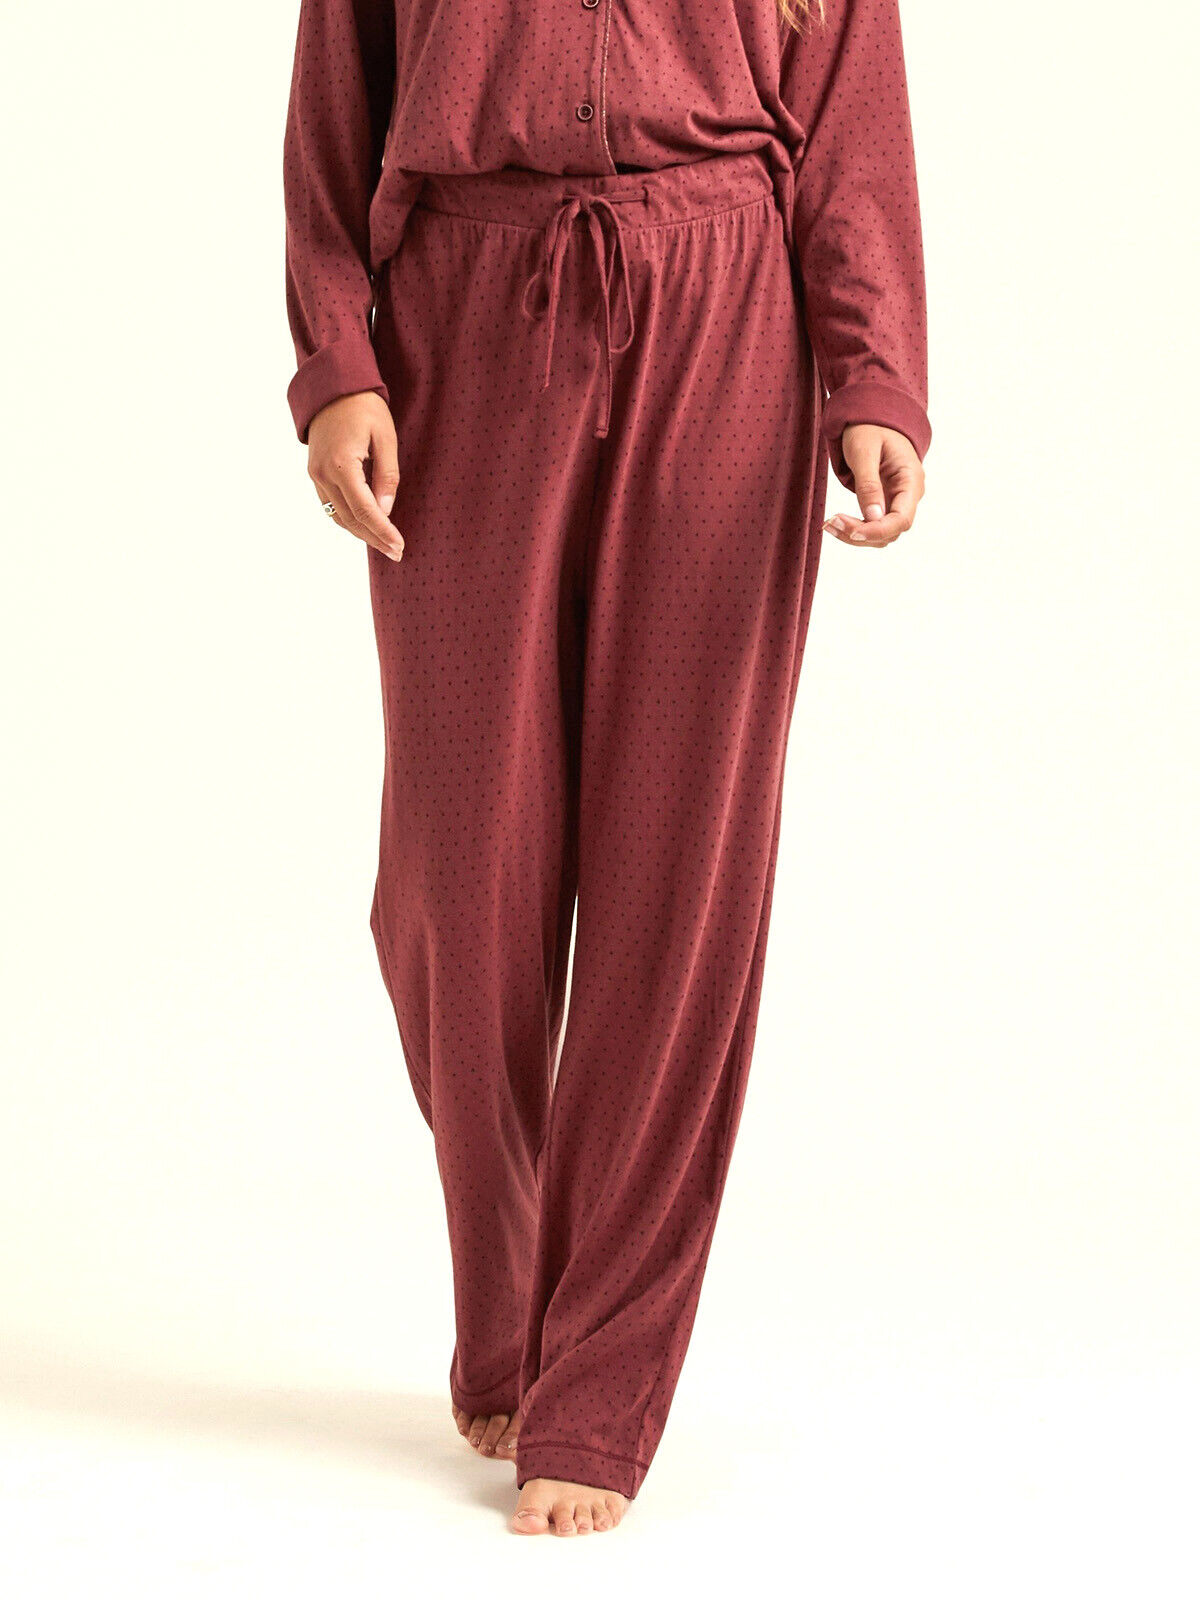 EX Fat Face Berry Mini Hearts Classic Lounge Pants in Size 10 RRP £32.50